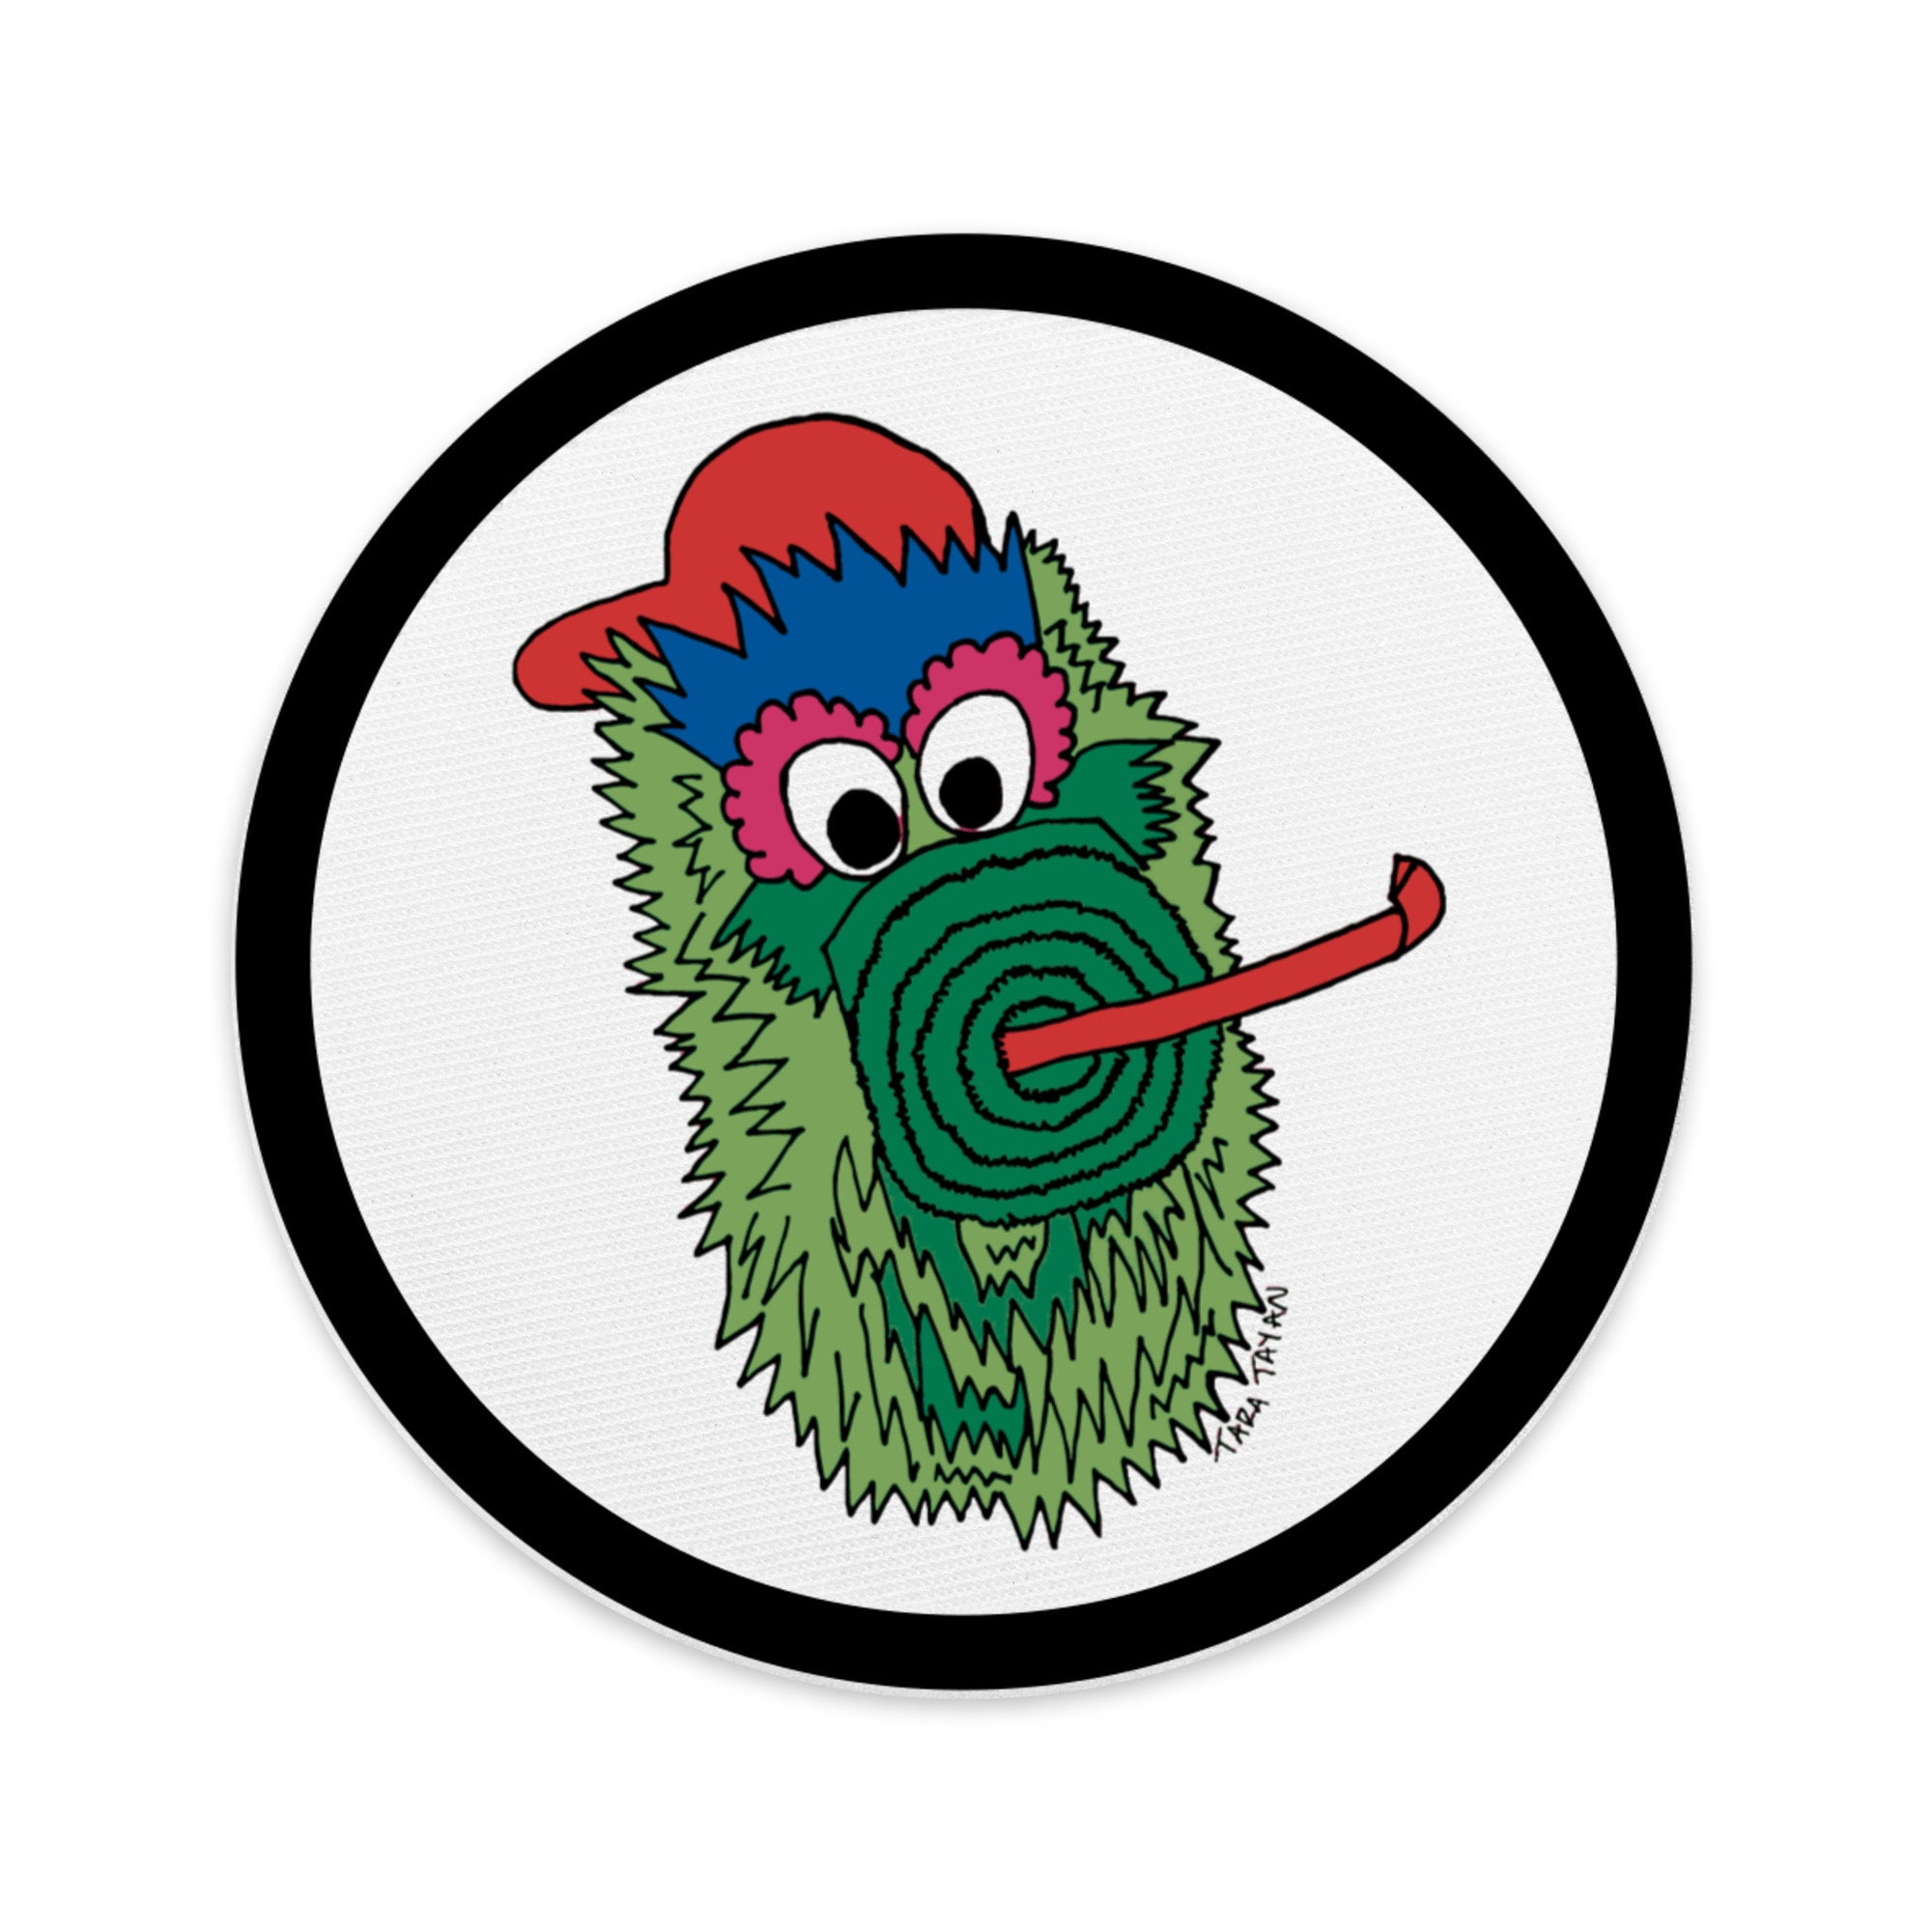 Phillies Phanatic Embroidered Patch Philly Patch Phillies 